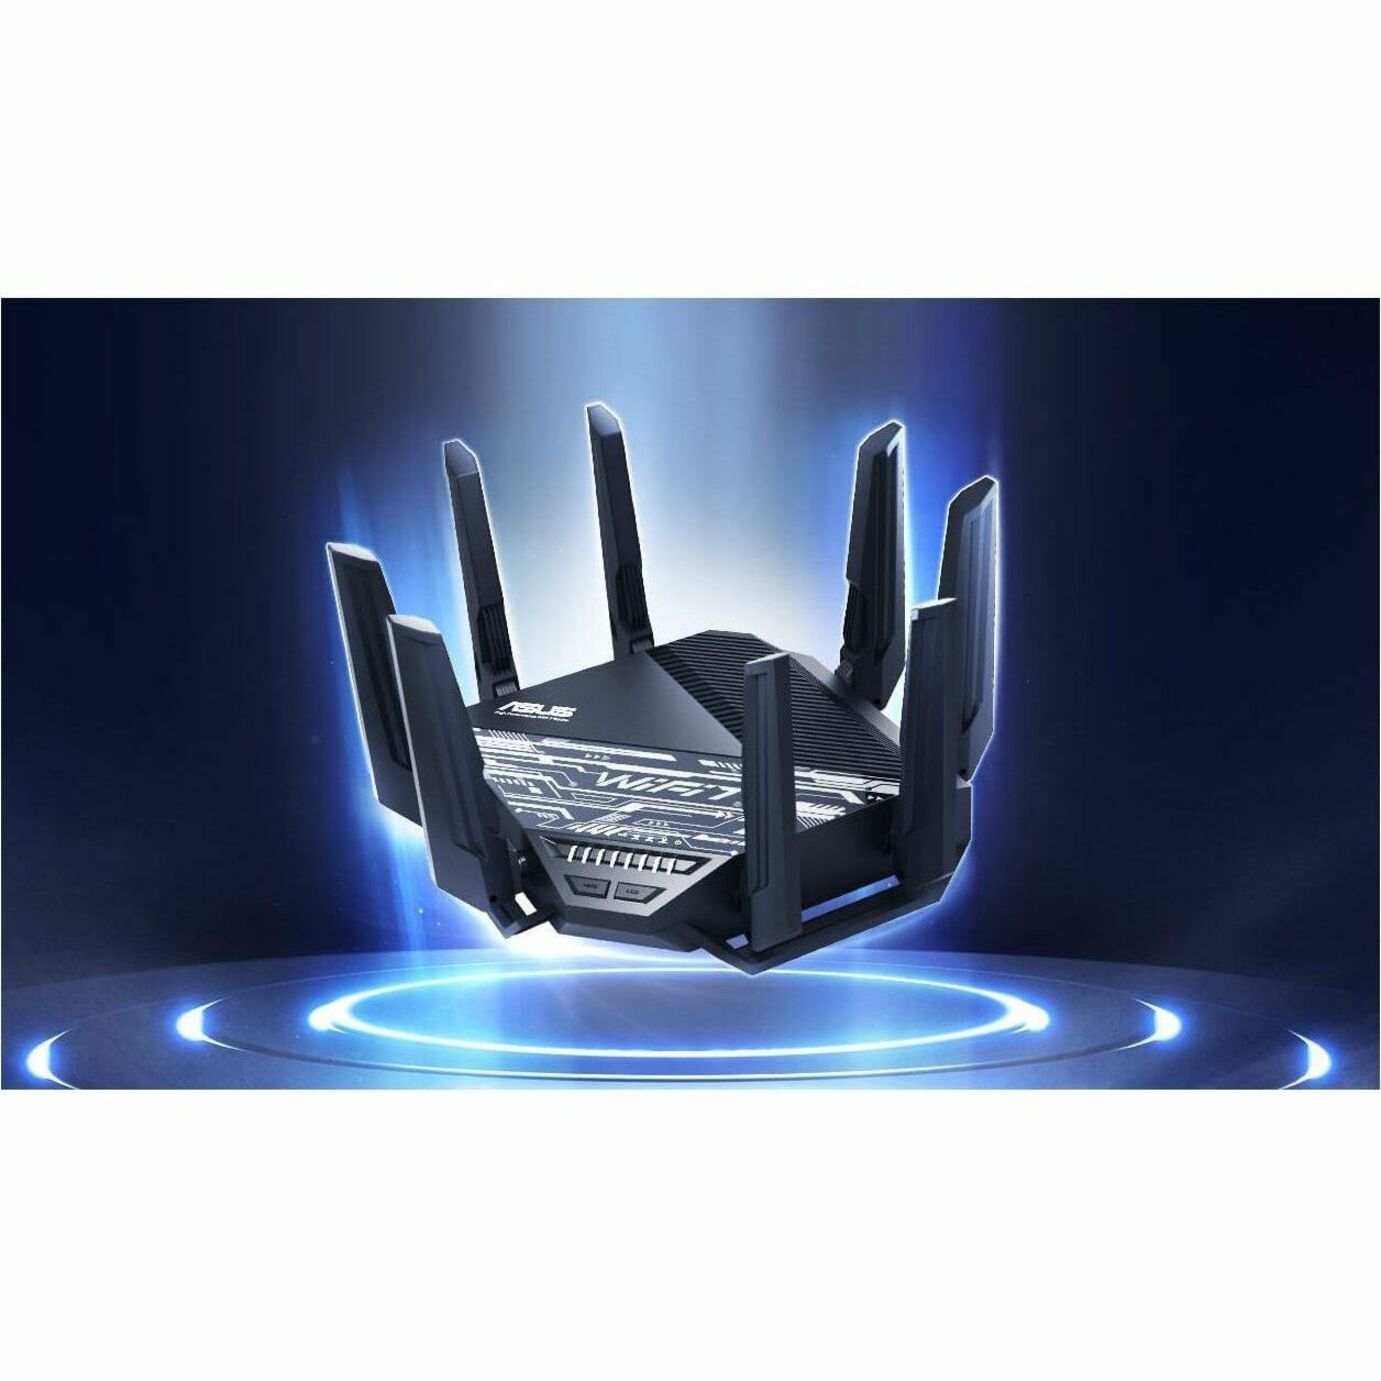 Asus RT-BE96U Wireless Router, Wi-Fi 7 Ethernet, Tri Band, 2.28 GB/s Transmission Speed